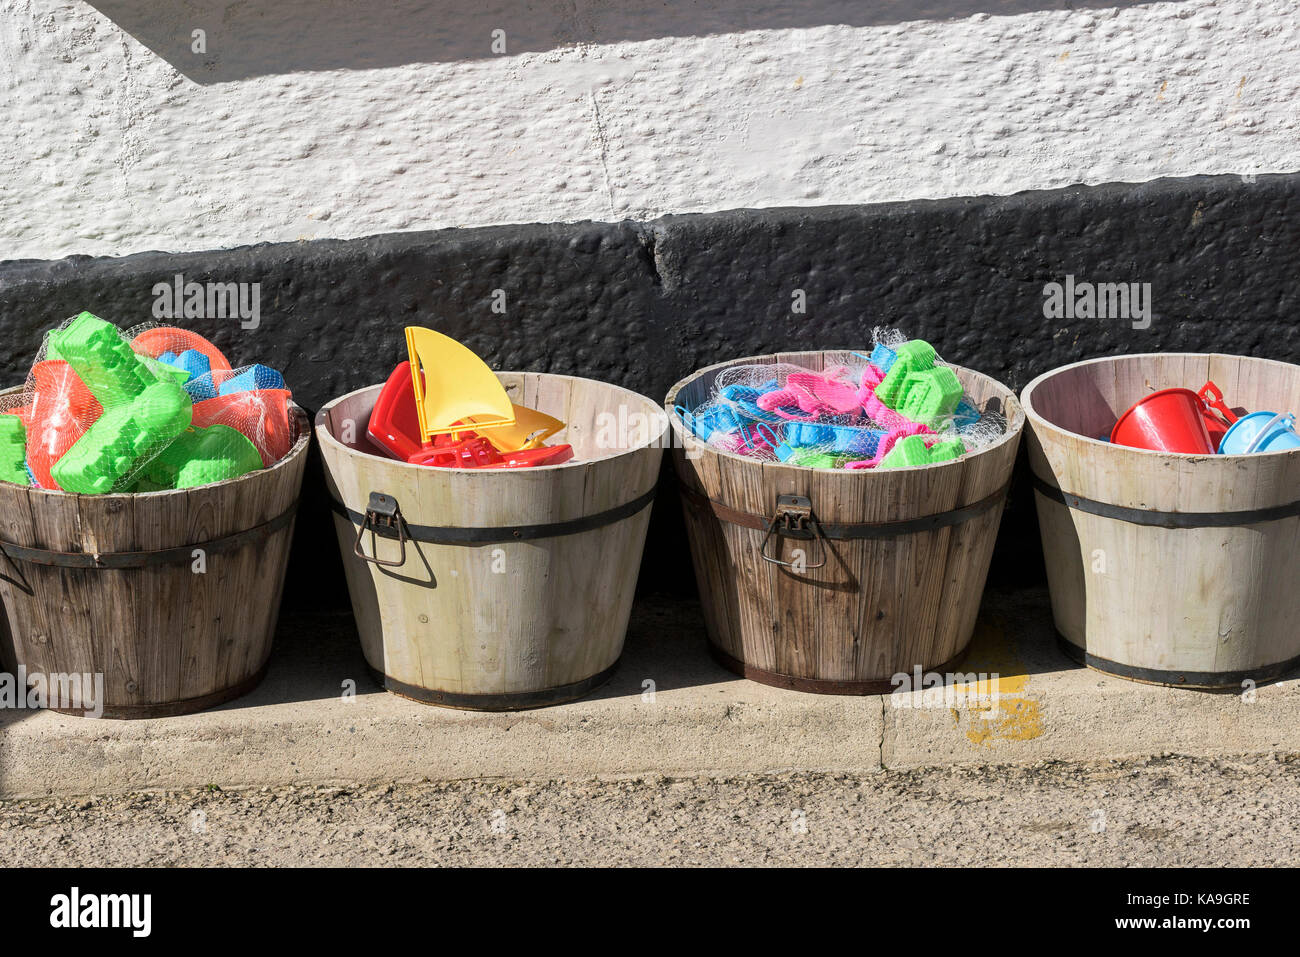 Wooden tubs of colourful plastic beach toys. Stock Photo